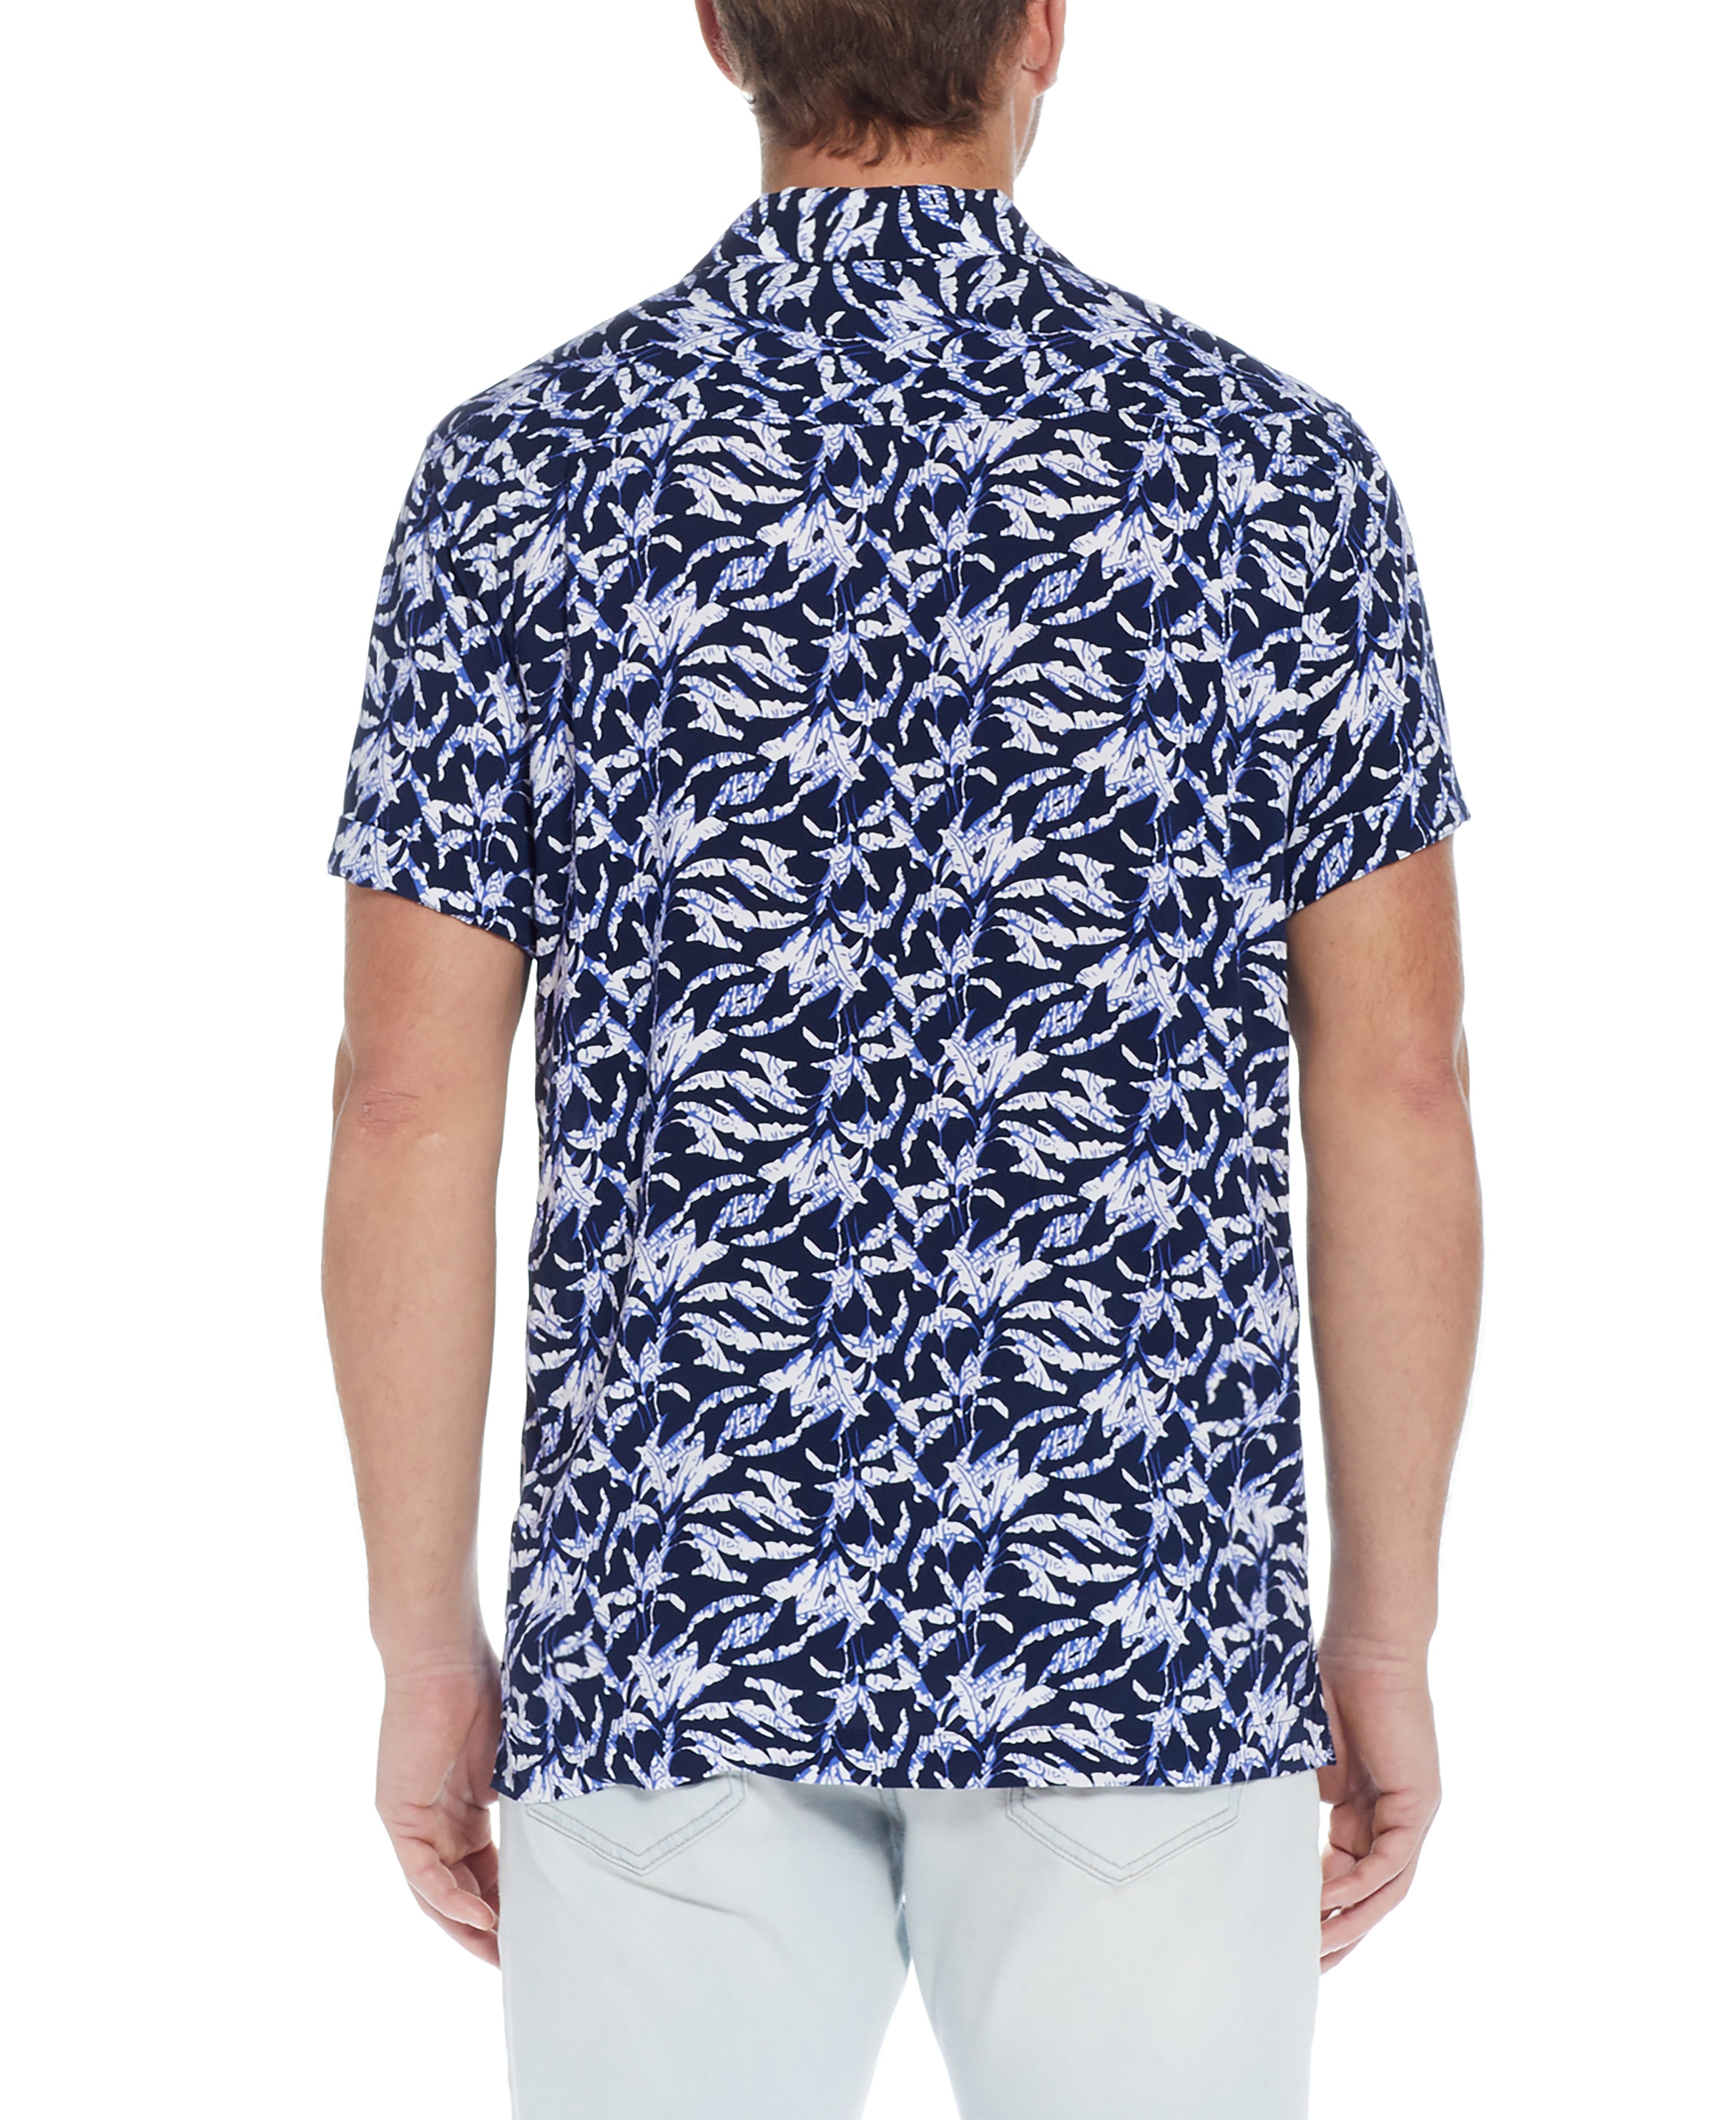 S/S RAYON PRINTED CAMP SHIRT in SAILOR BLUE